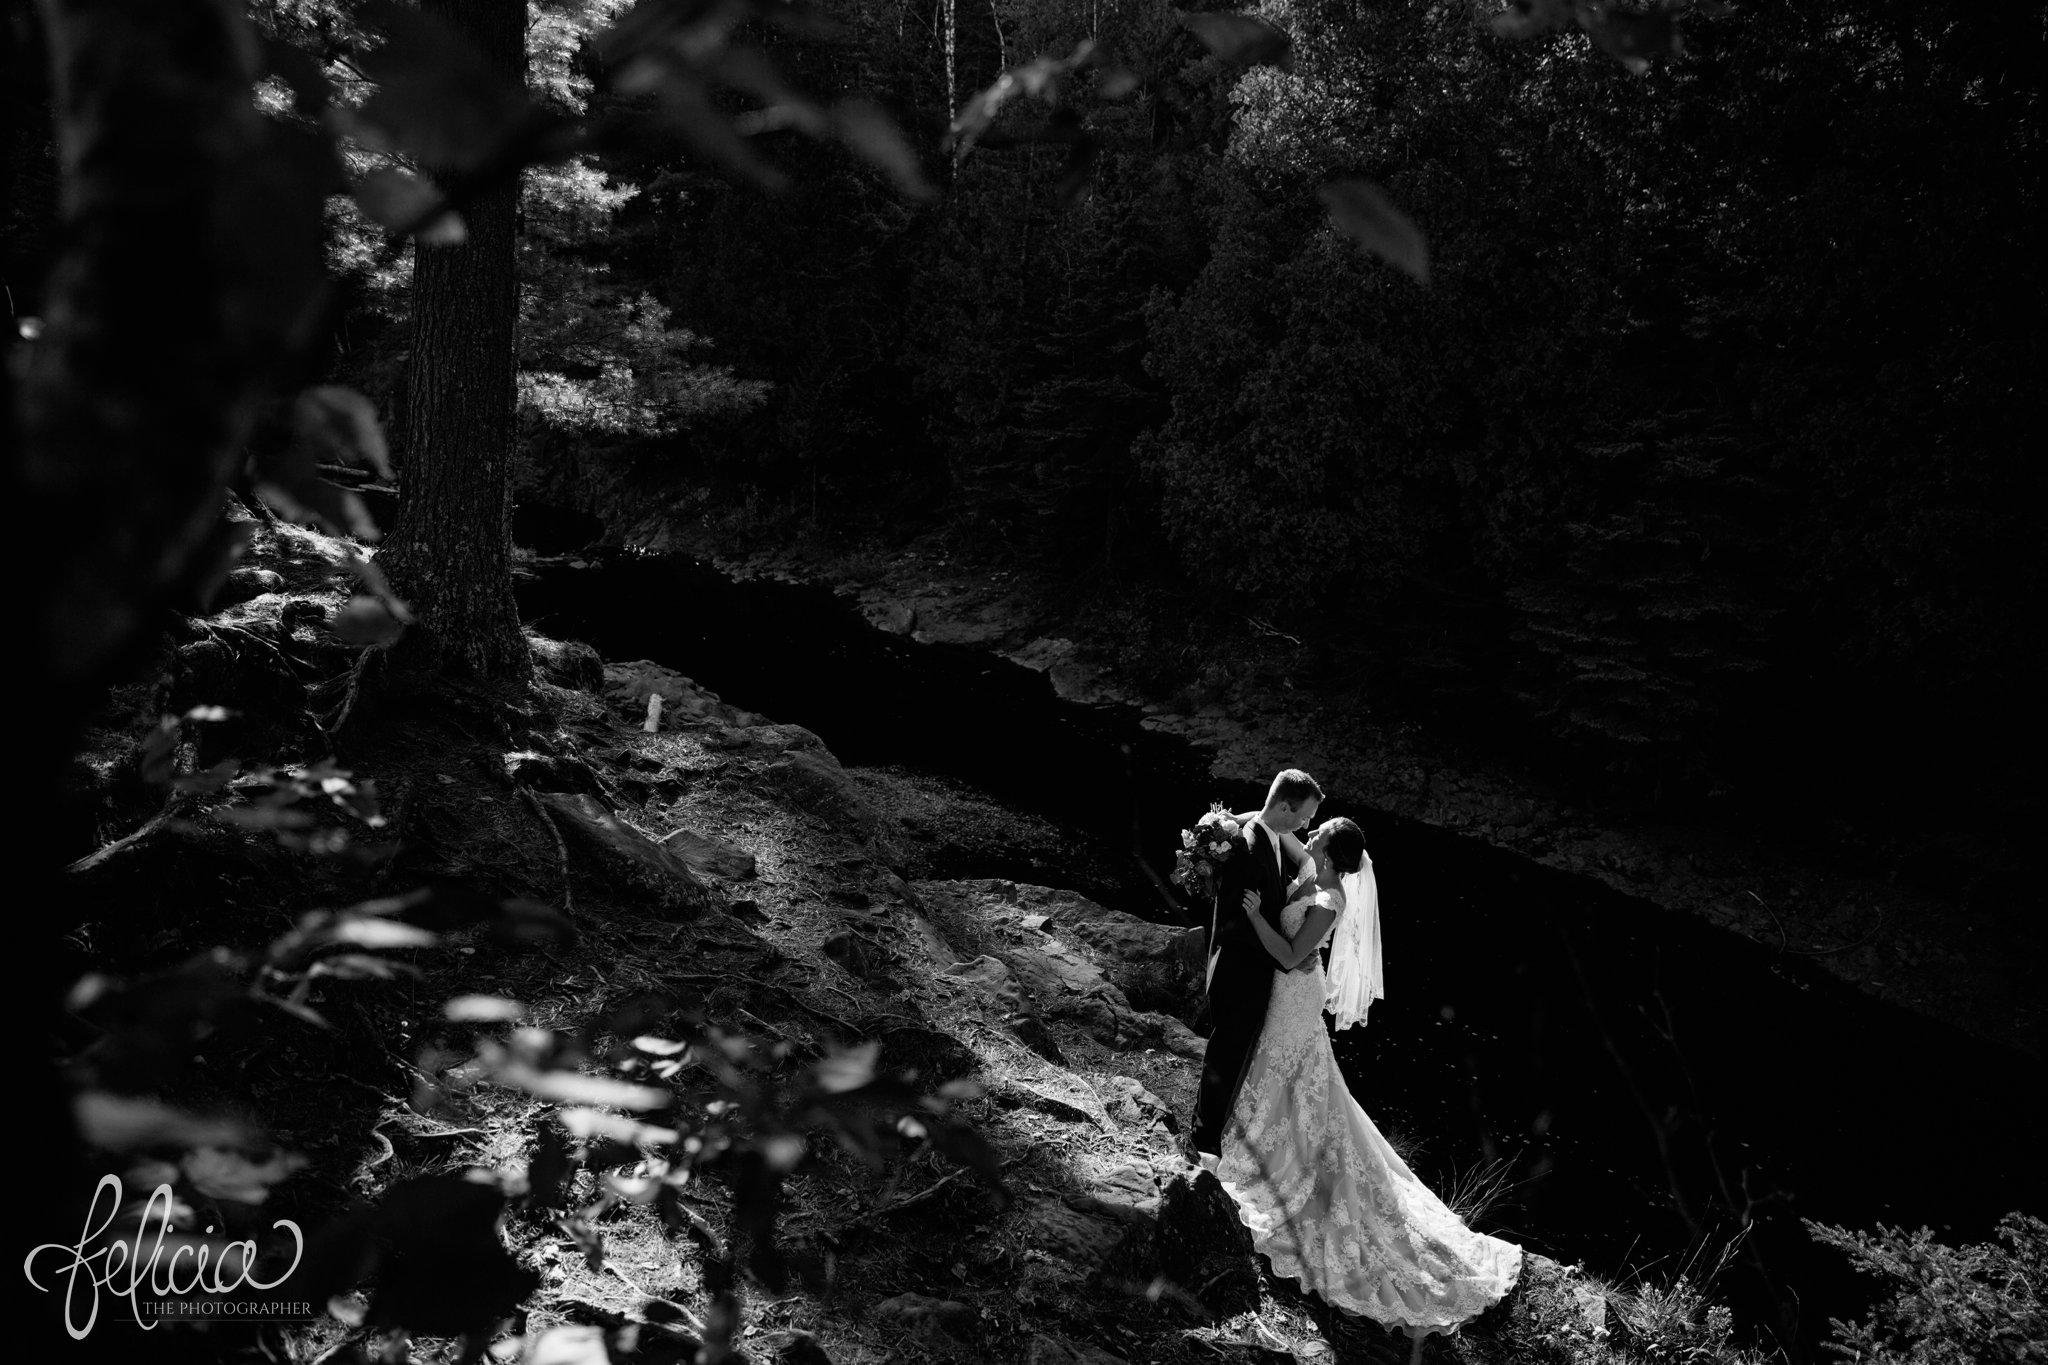 Black and White | Wedding | Wedding Photography | Wedding Photos | Felicia the Photographer | Images by feliciathephotographer.com | Travel Photographer | Duluth | St. Benedict Church | Christian Lane Bridal | Bride and Groom Portrait | Stream | Nature | Evergreen | Forest | Sun Flare | Dramatic | Train 